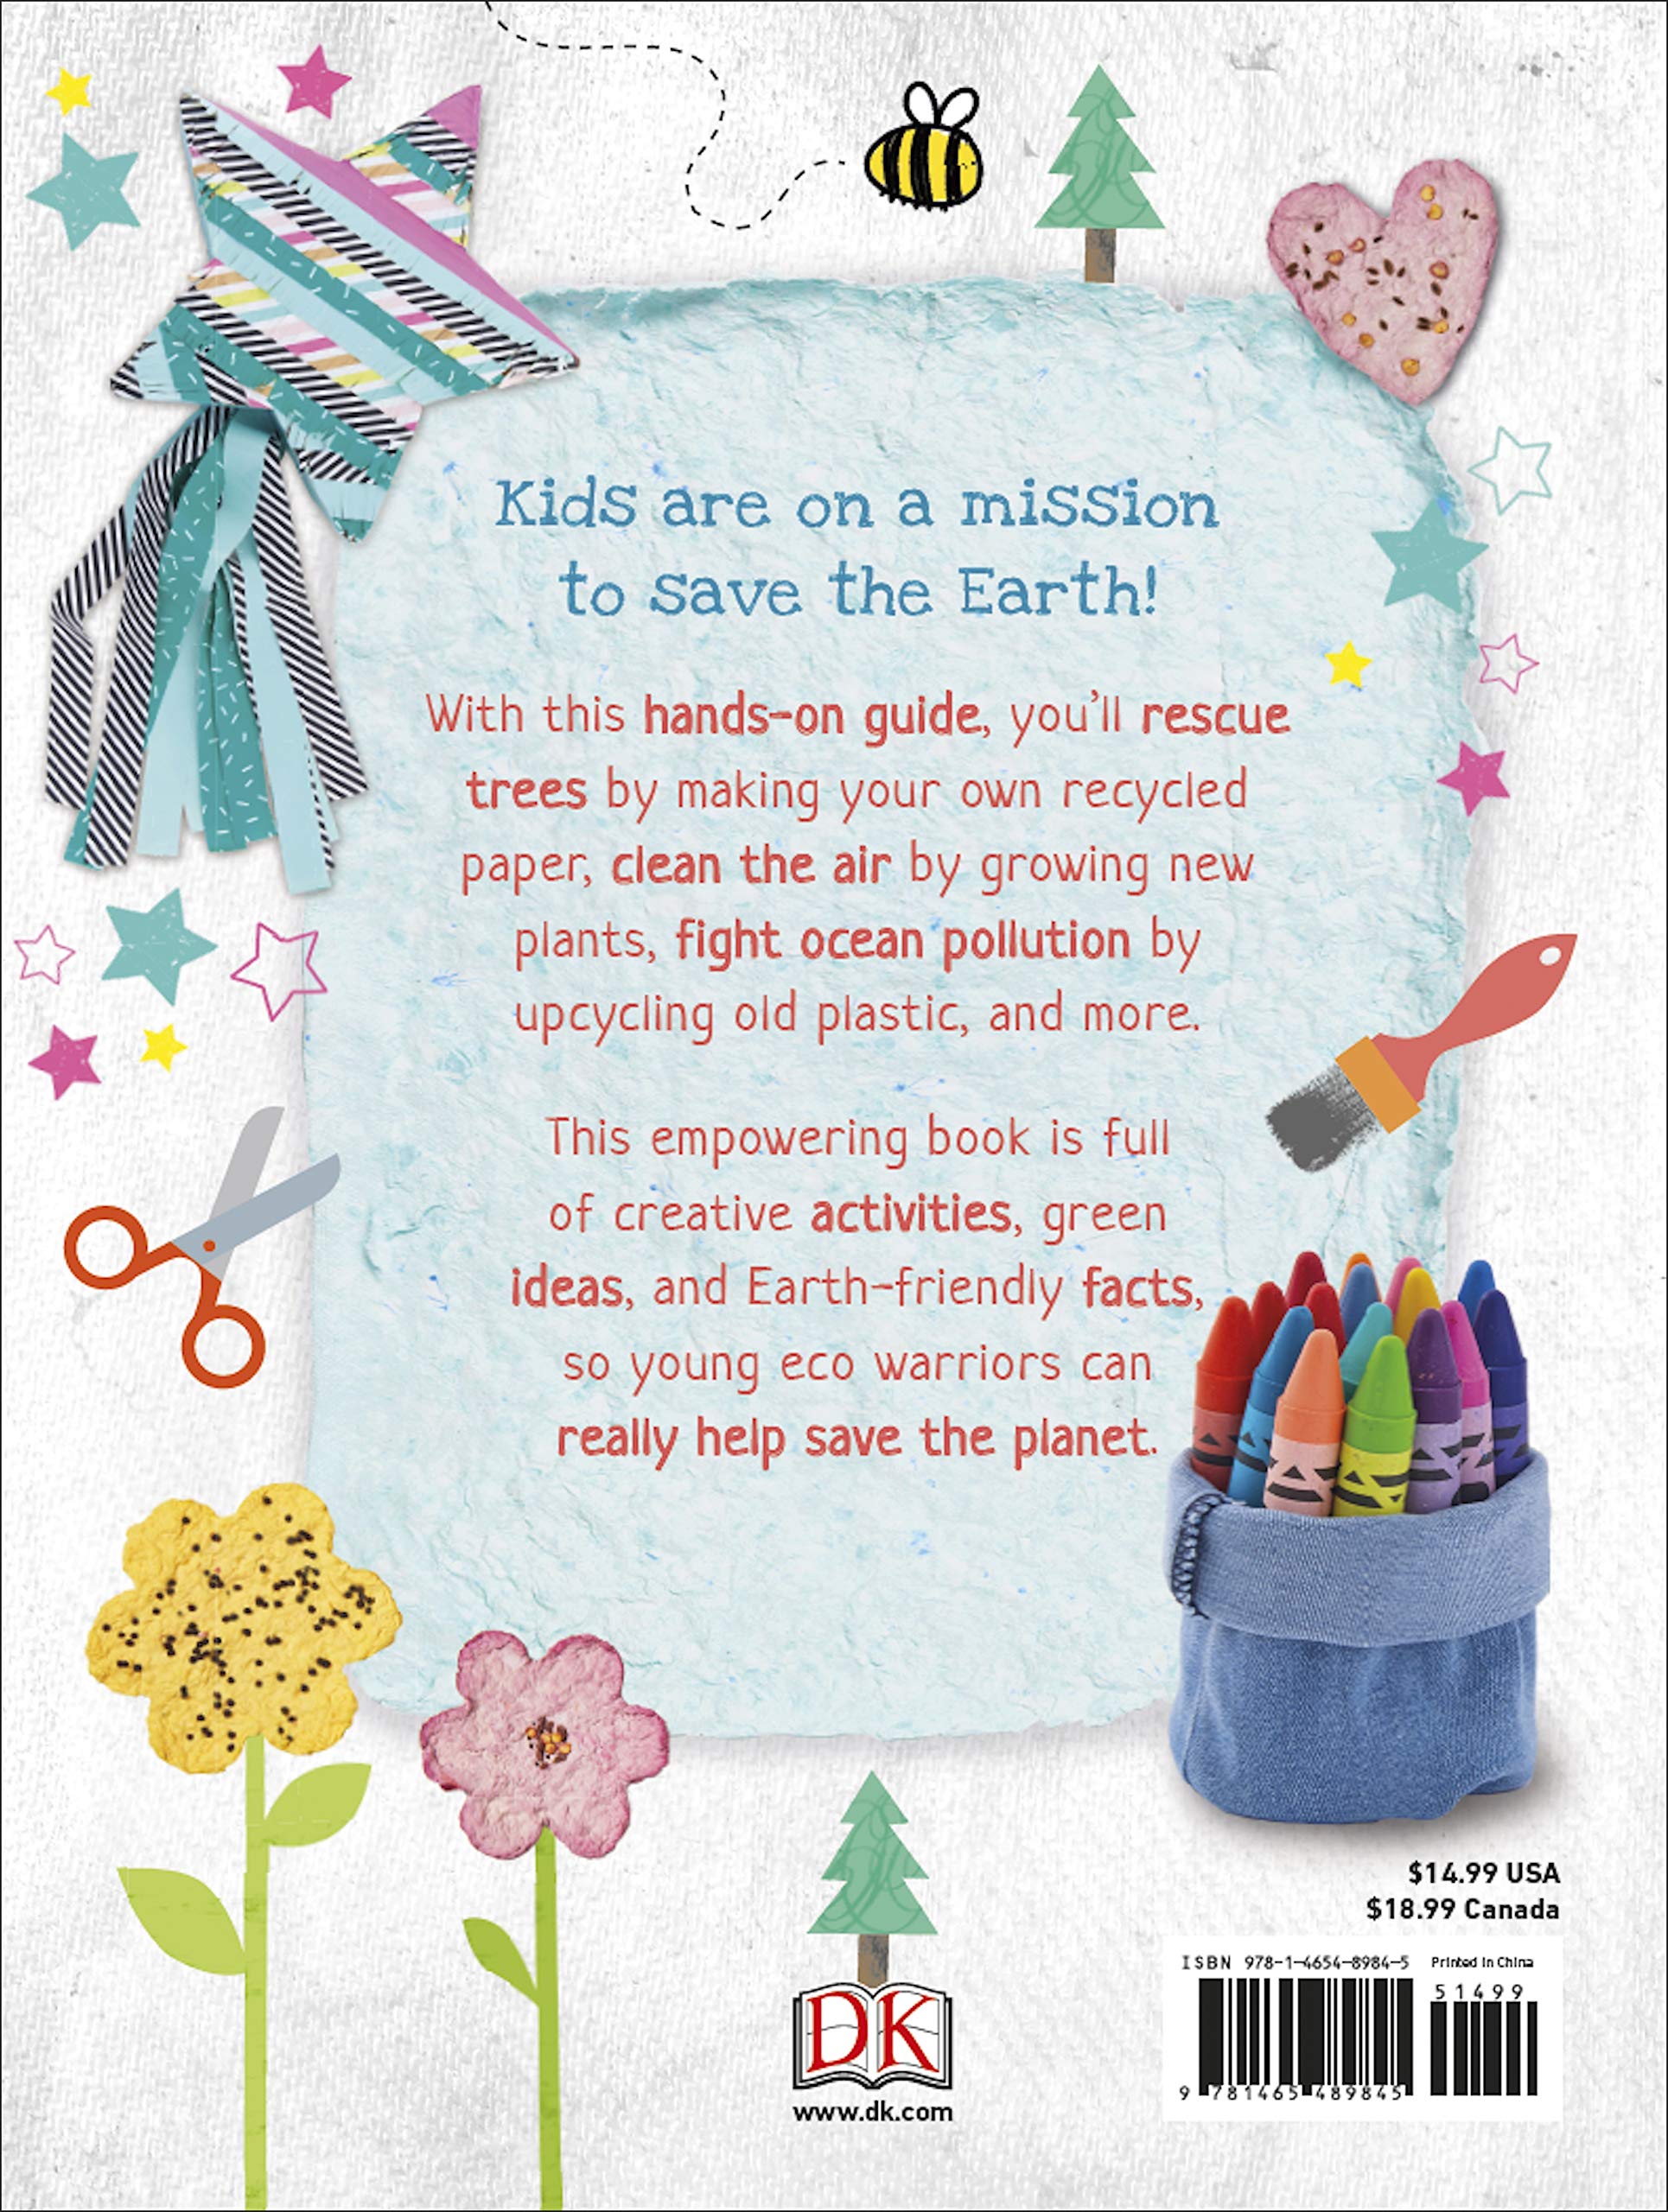 Recycle And Remake: Creative Projects For Eco Kids